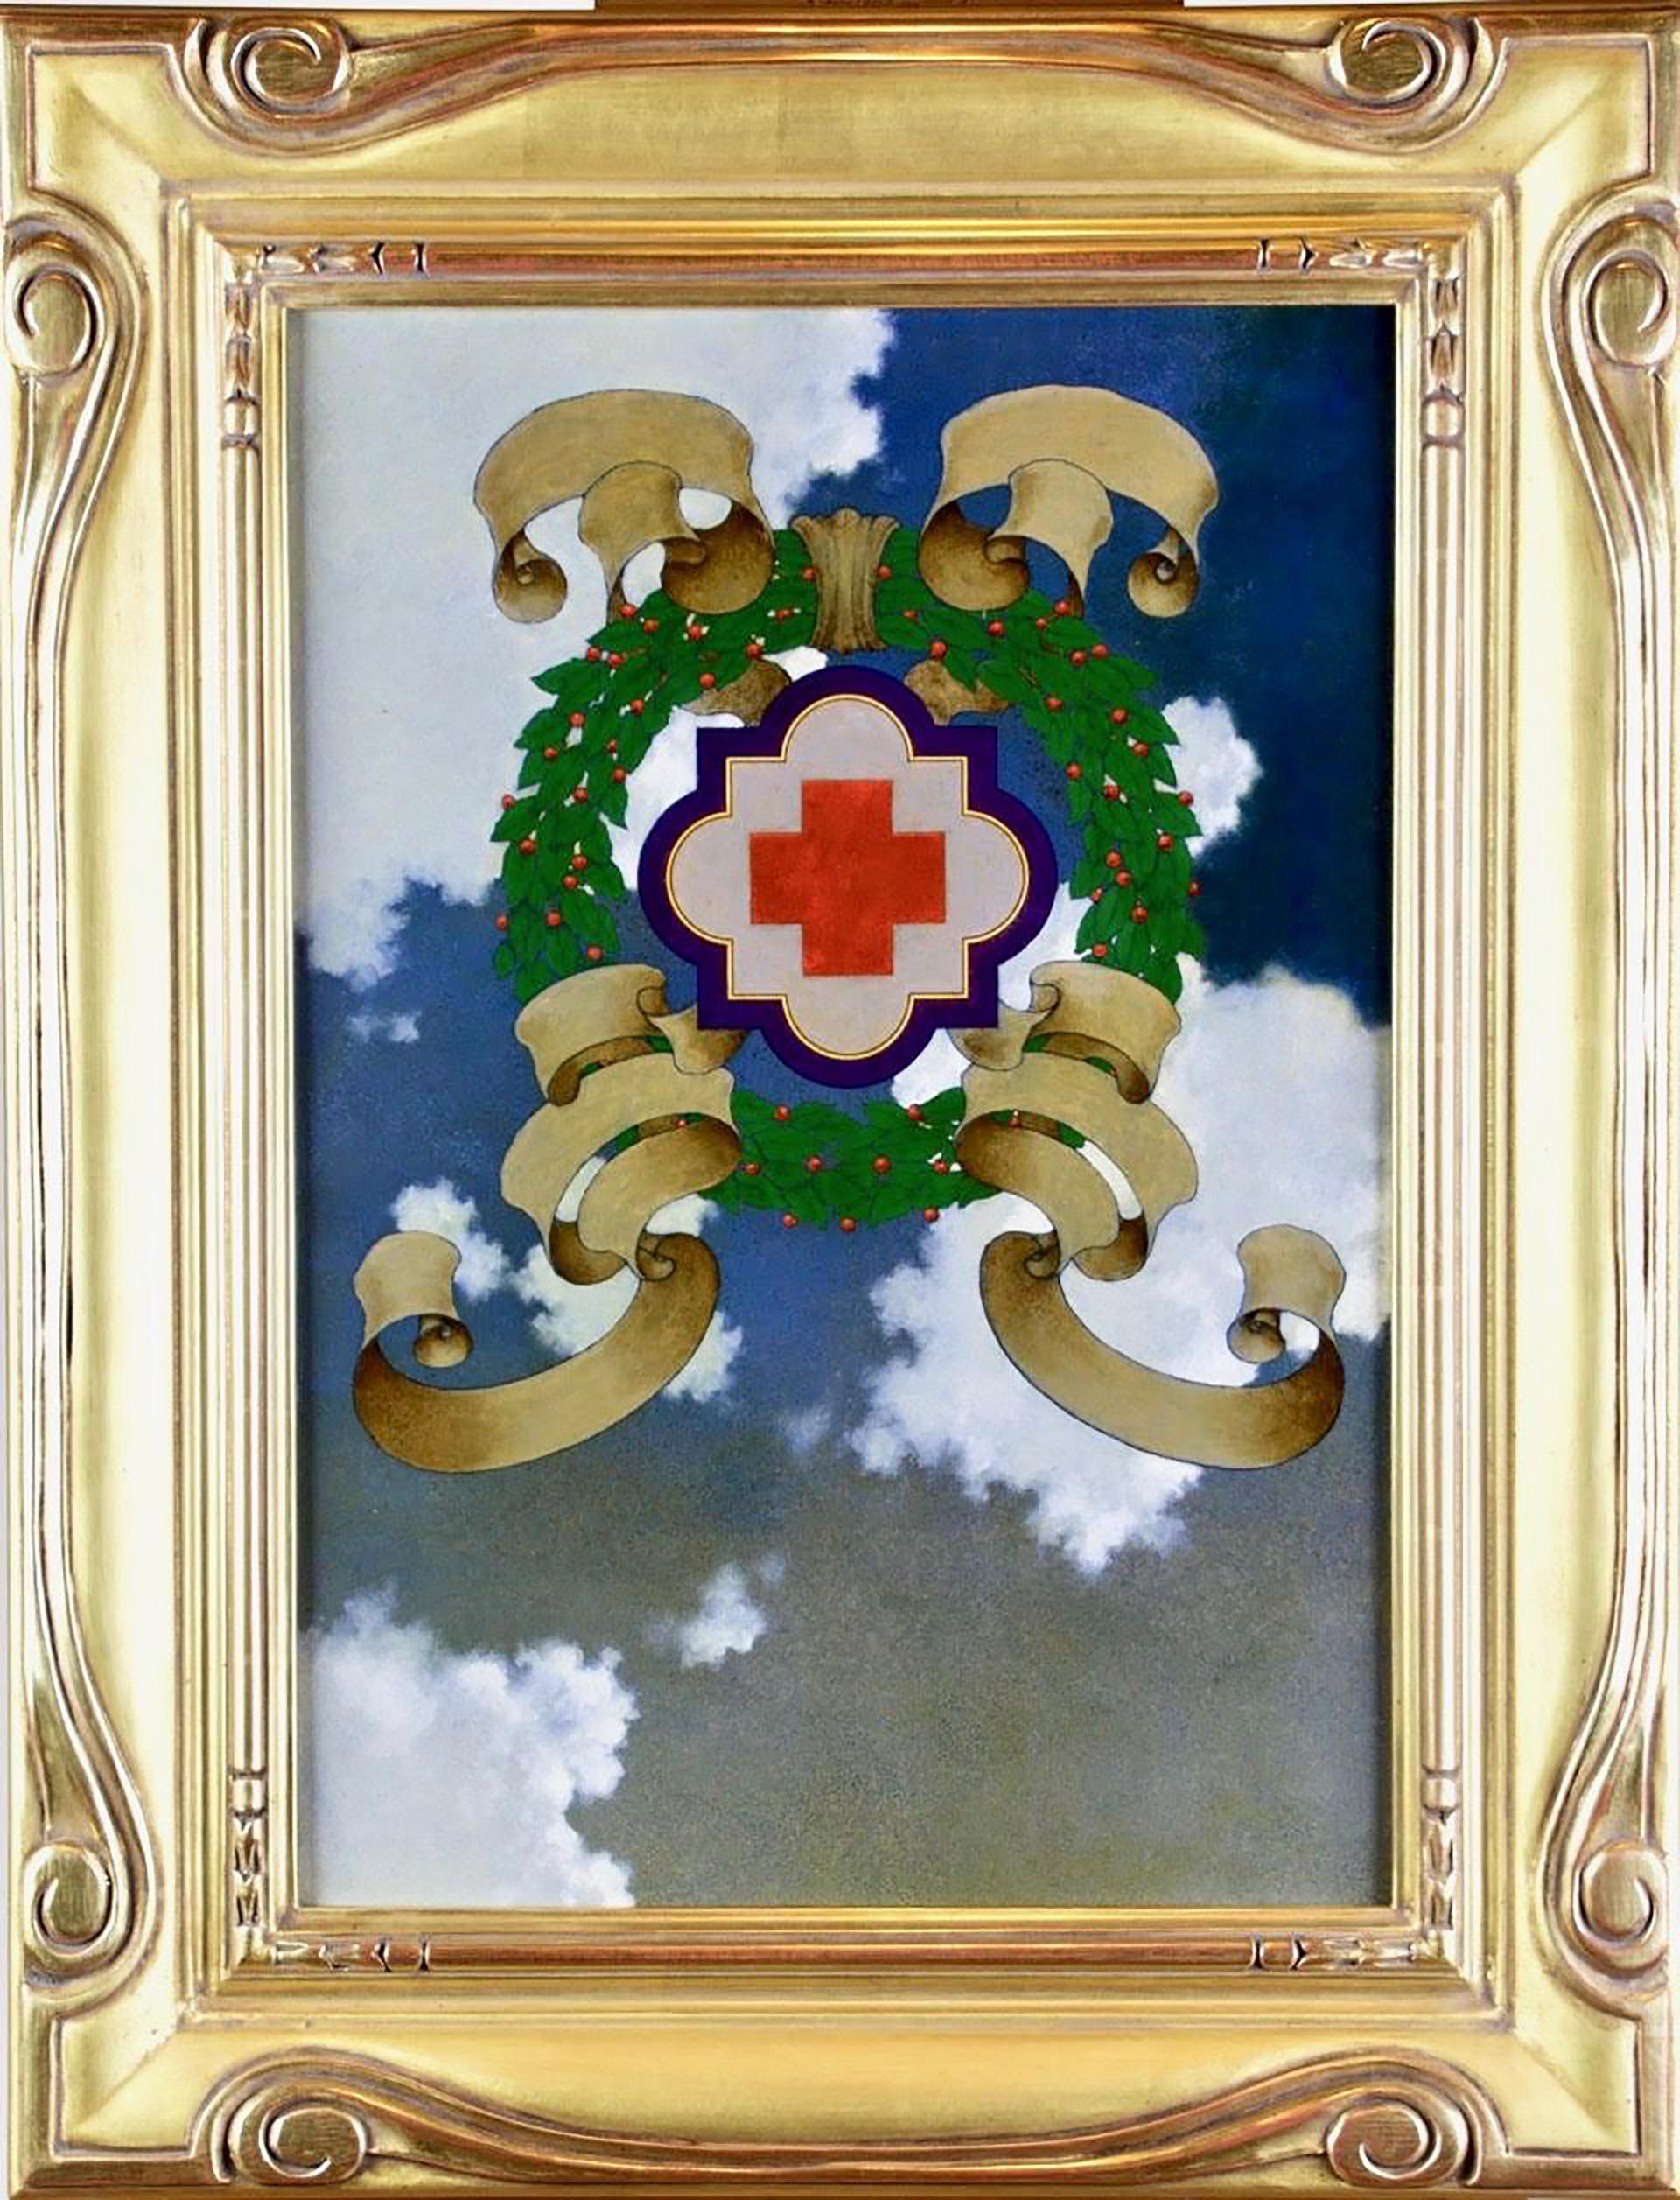 Original Illustration for Red Cross Advertisement - Painting by Maxfield Parrish